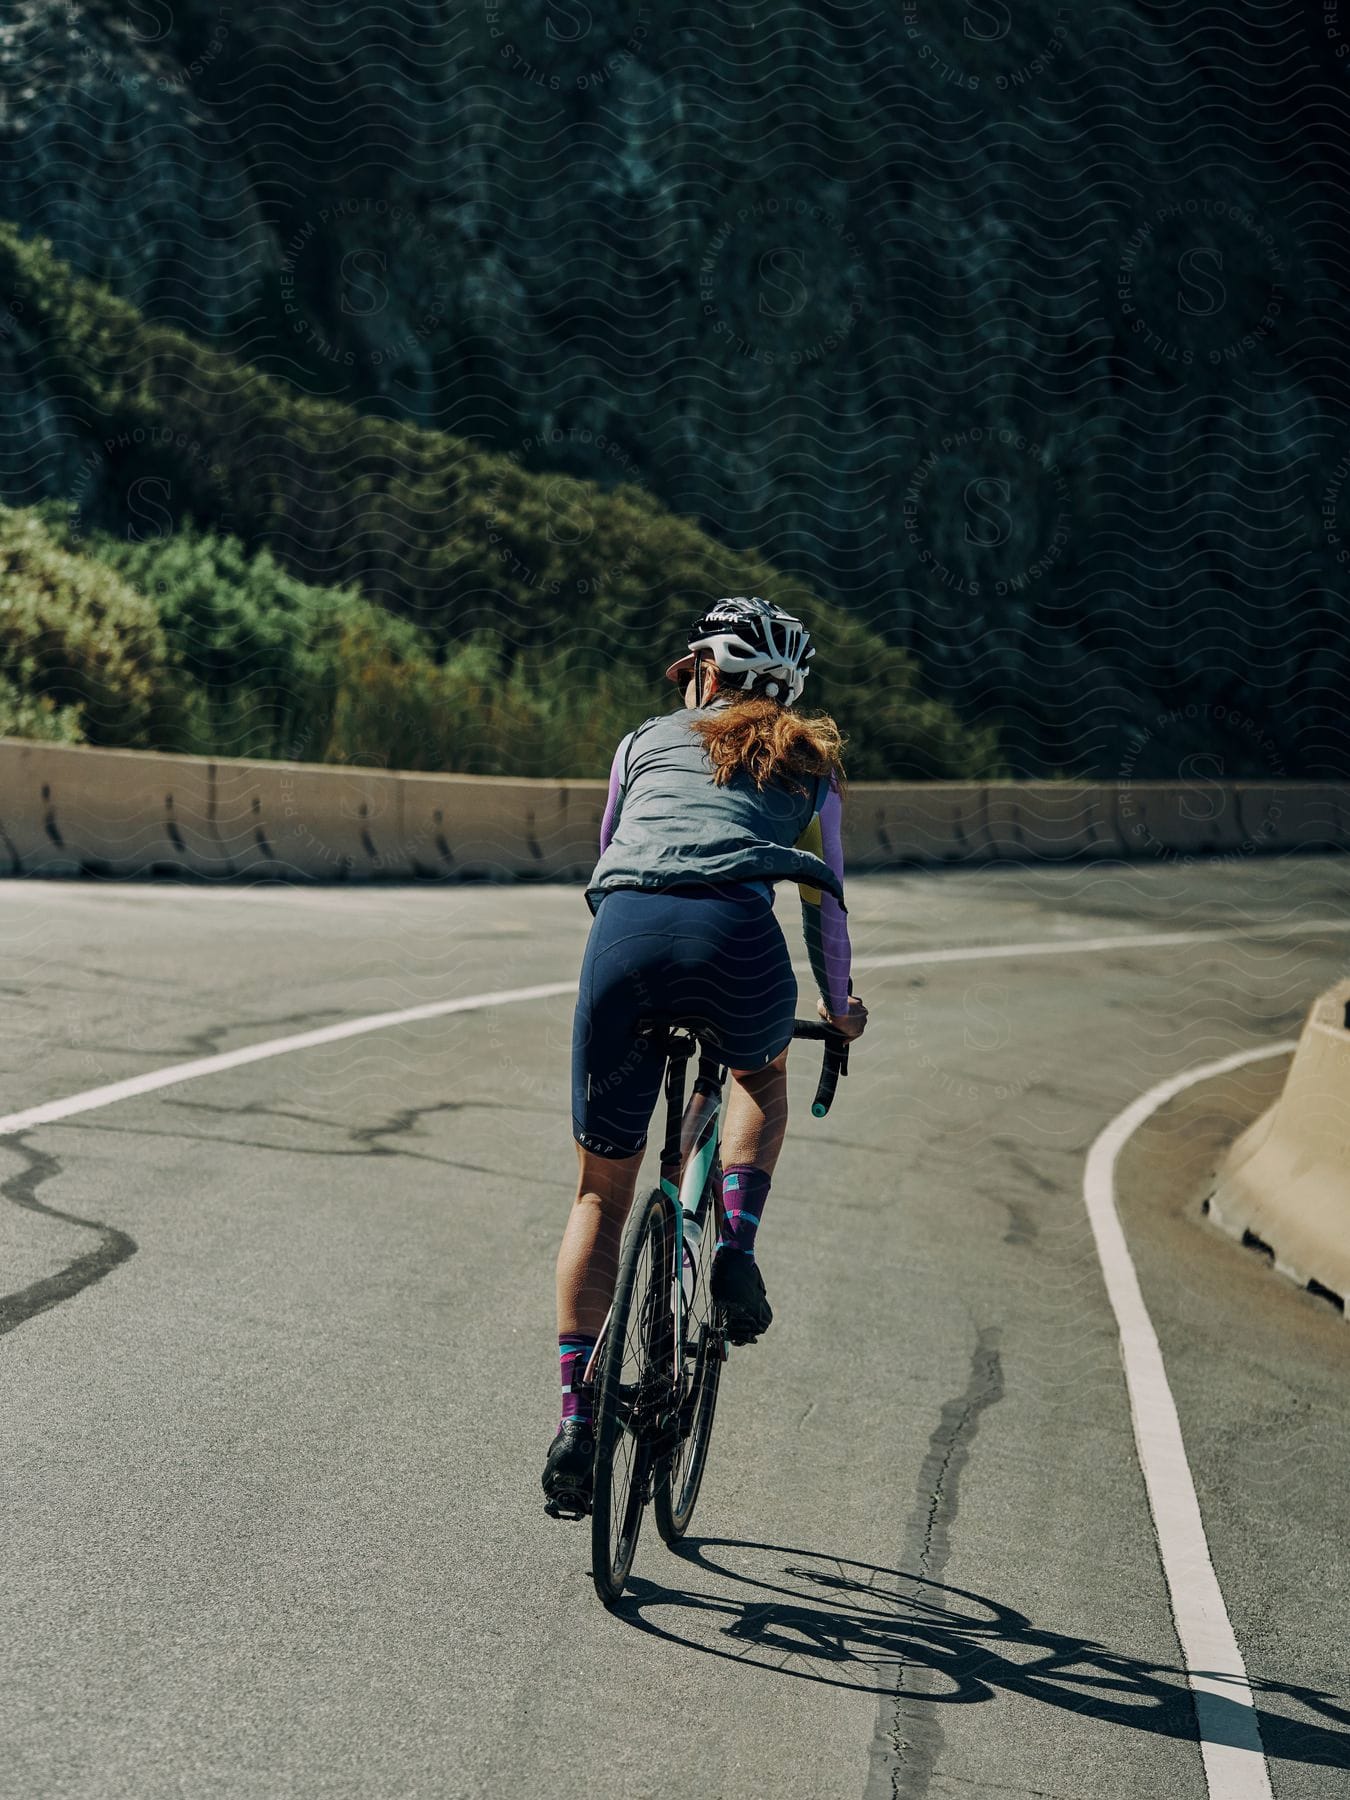 A woman rides a bicycle on a highway near a mountain